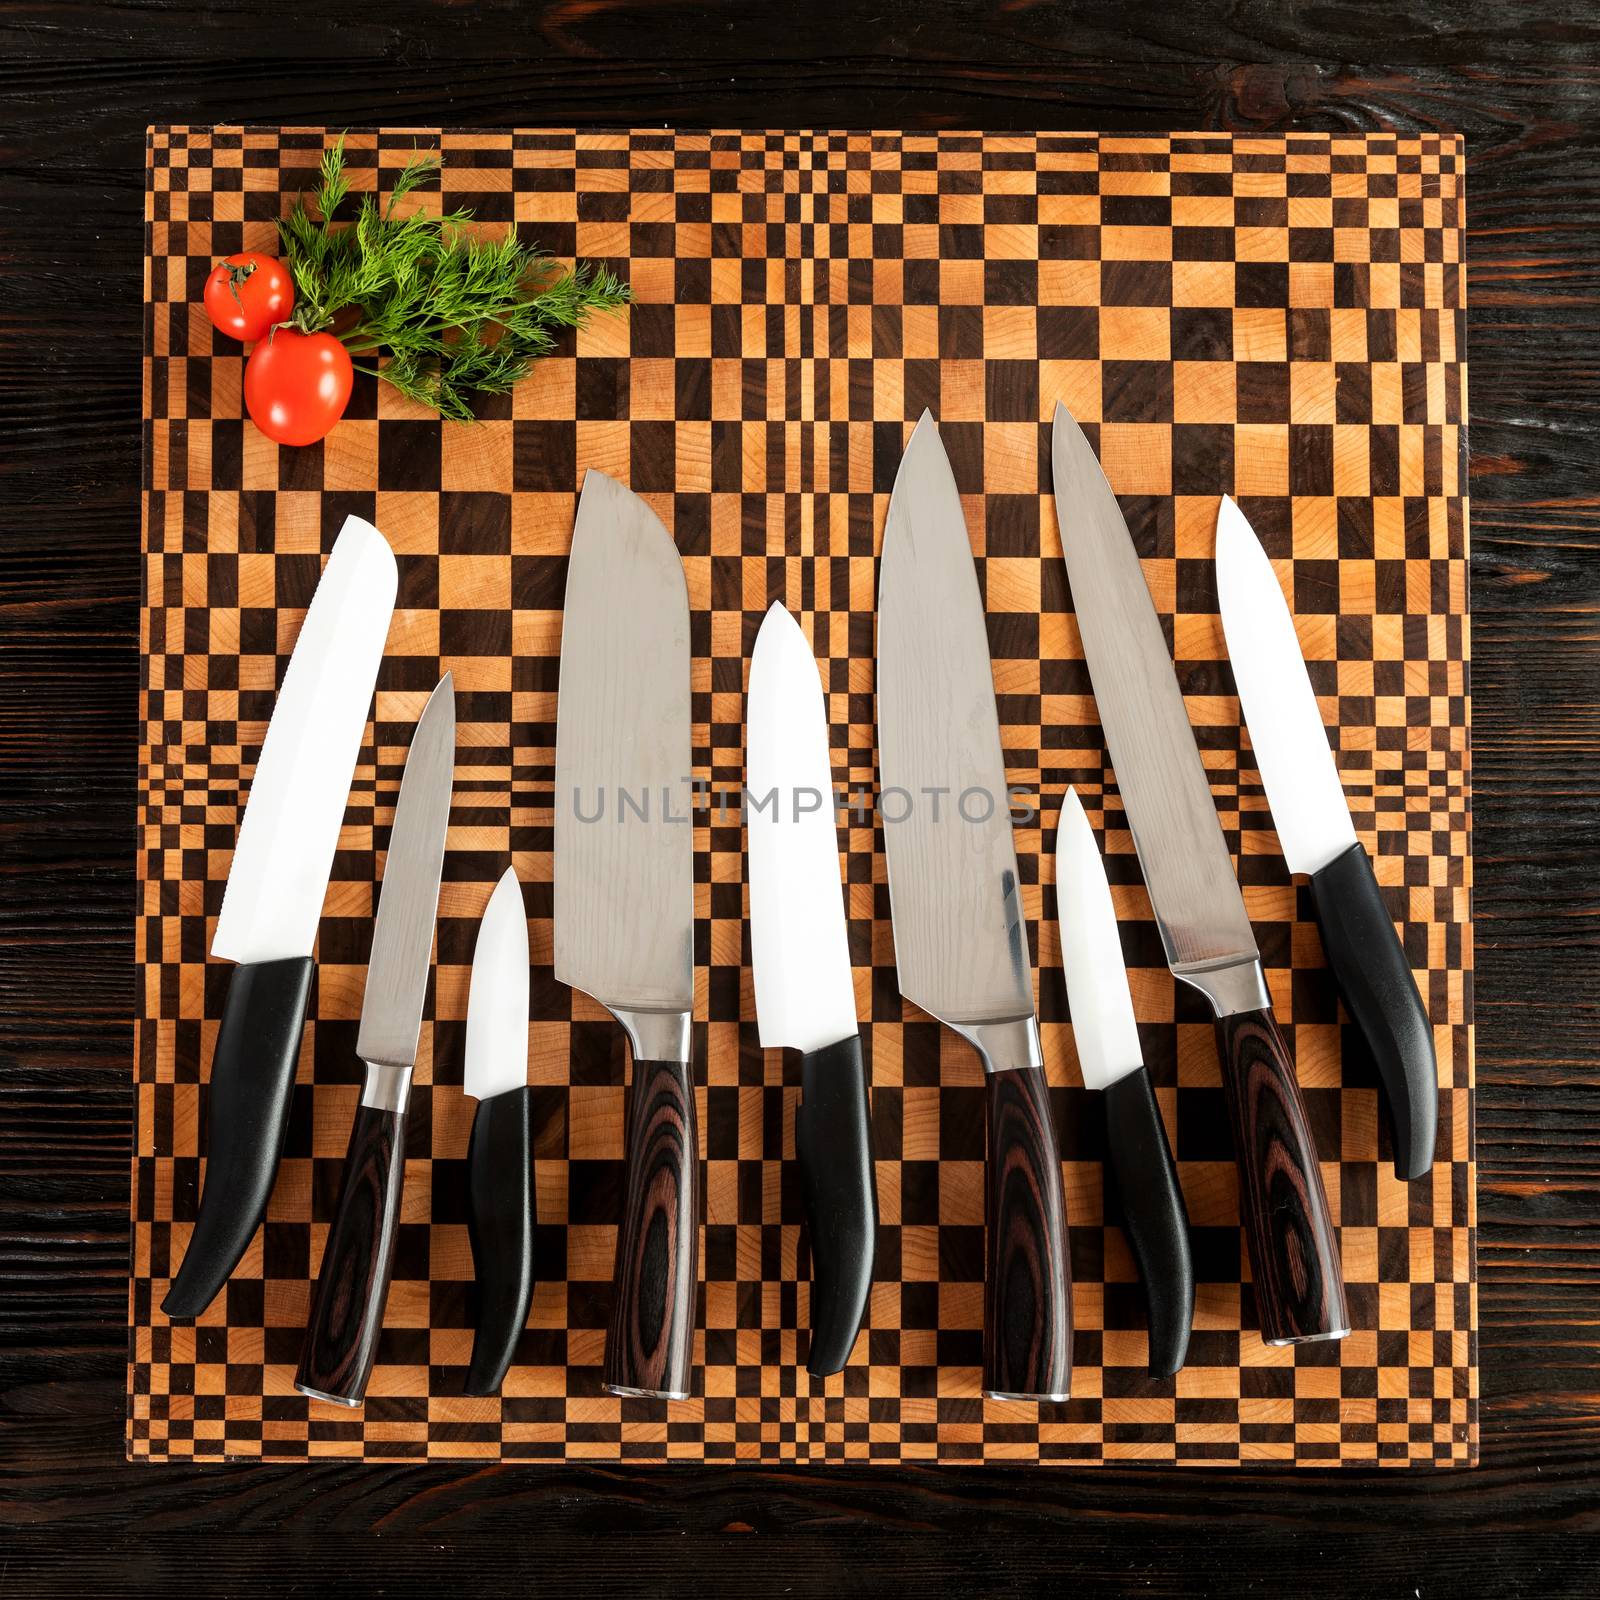 A set of high quality kitchen knives on a wooden cutting board